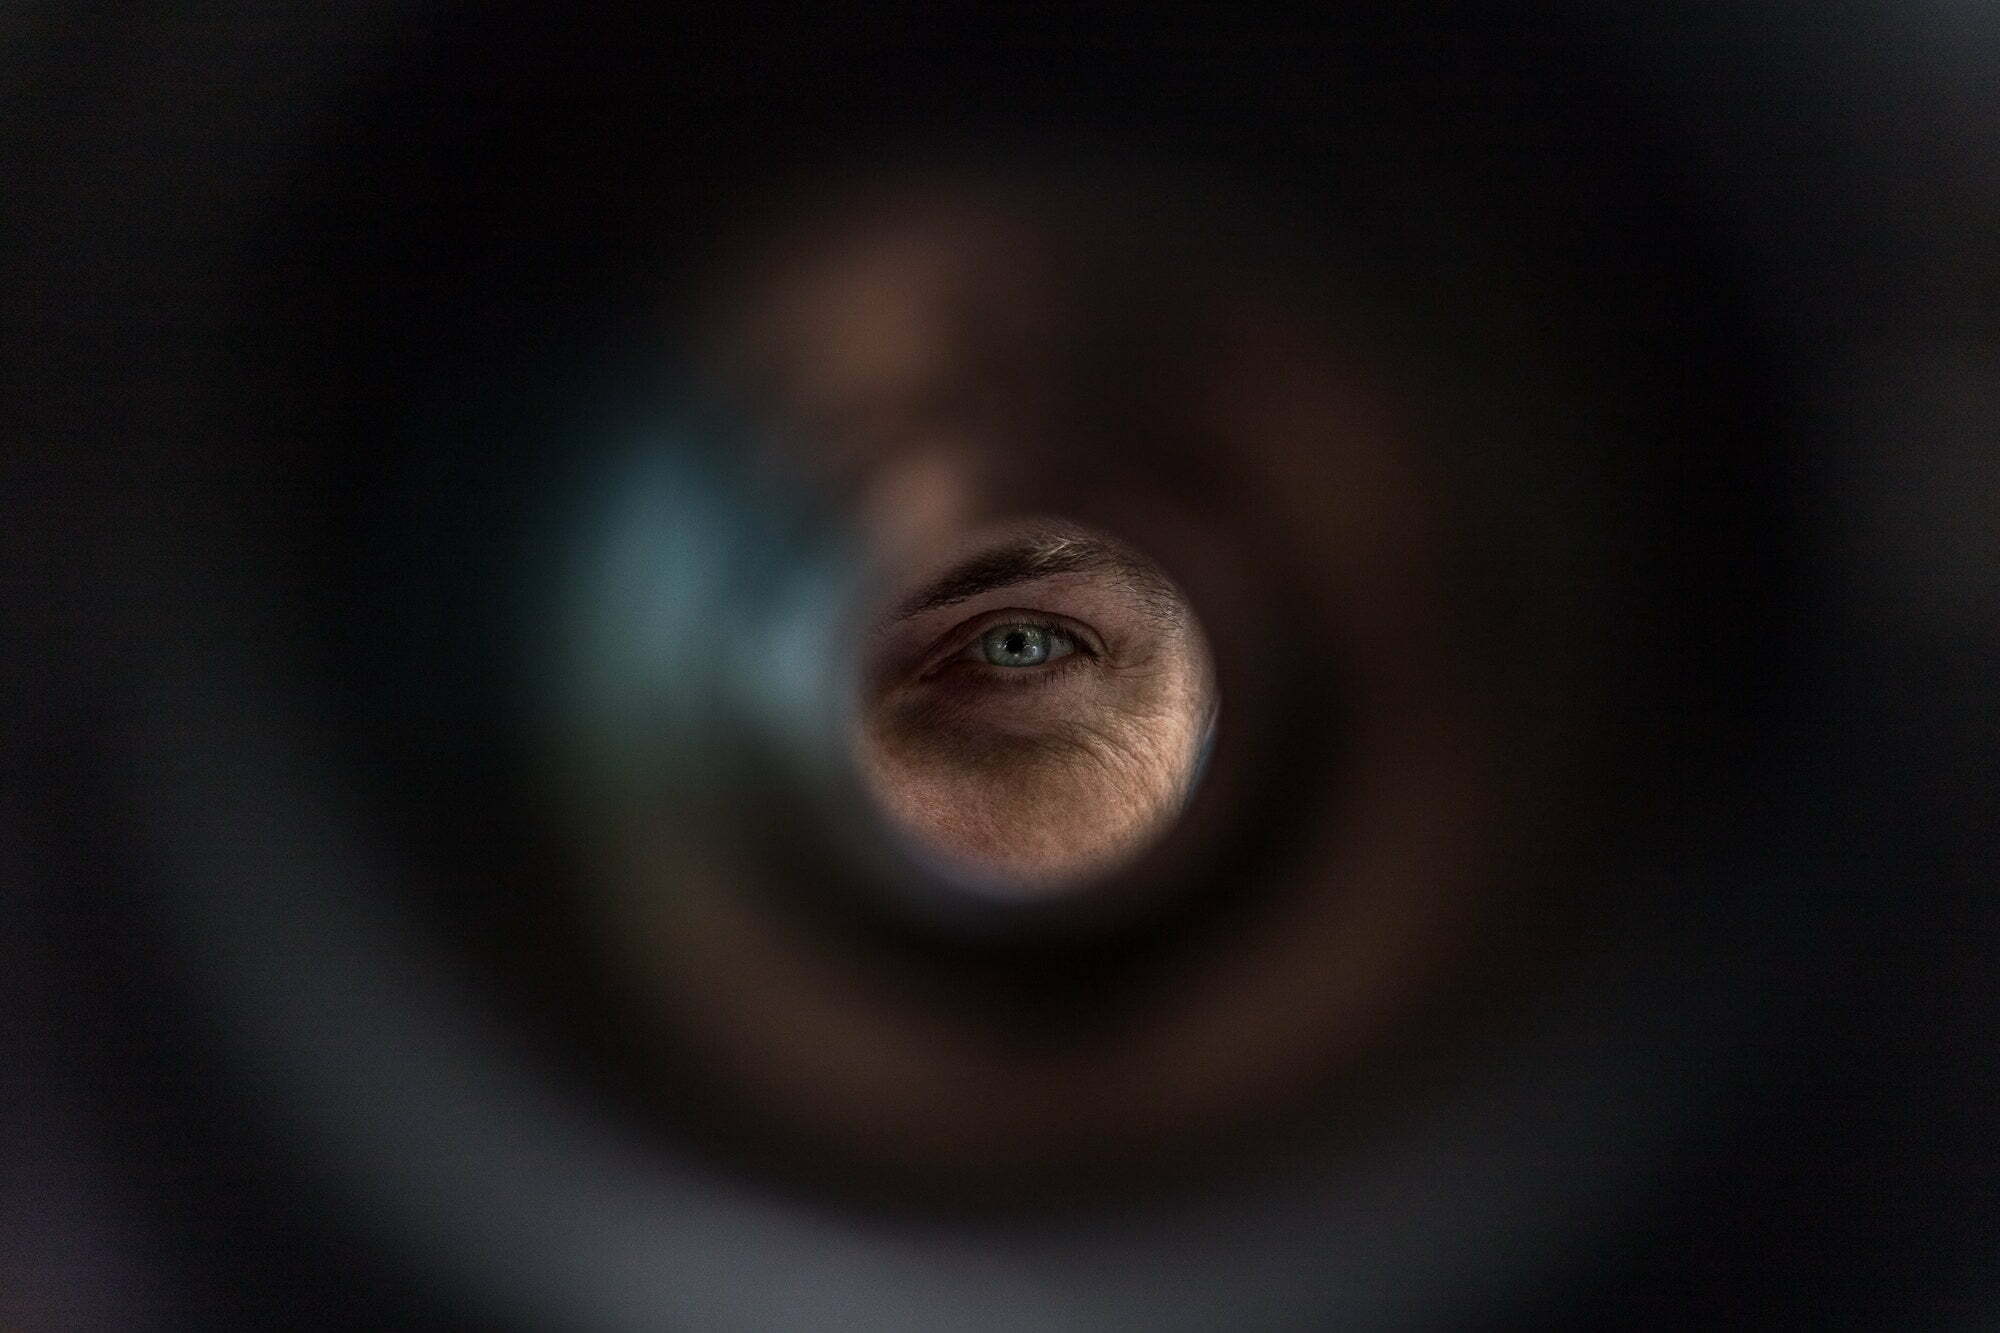 A man's eye looks through the tube. Minimalism. Abstraction